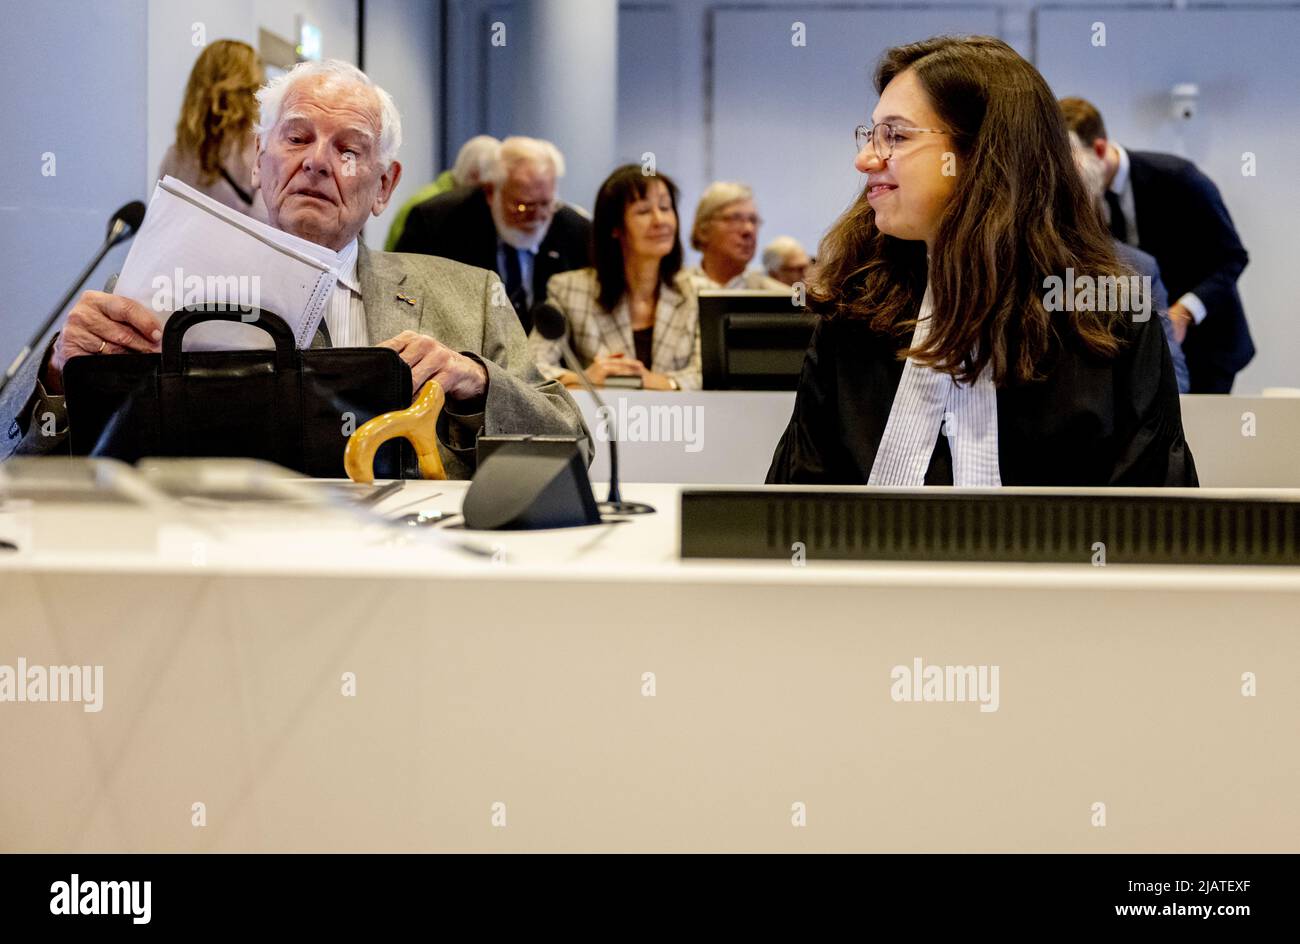 2022-06-01 10:00:57 THE HAGUE - Jan van Wagendonk in court. The court will rule in the case that the Japanese Honorary Debts Foundation has brought against the Dutch State in order to obtain compensation for the war damage suffered by the Dutch during the Japanese occupation in the former Dutch East Indies. ANP ROBIN UTRECHT netherlands out - belgium out Stock Photo